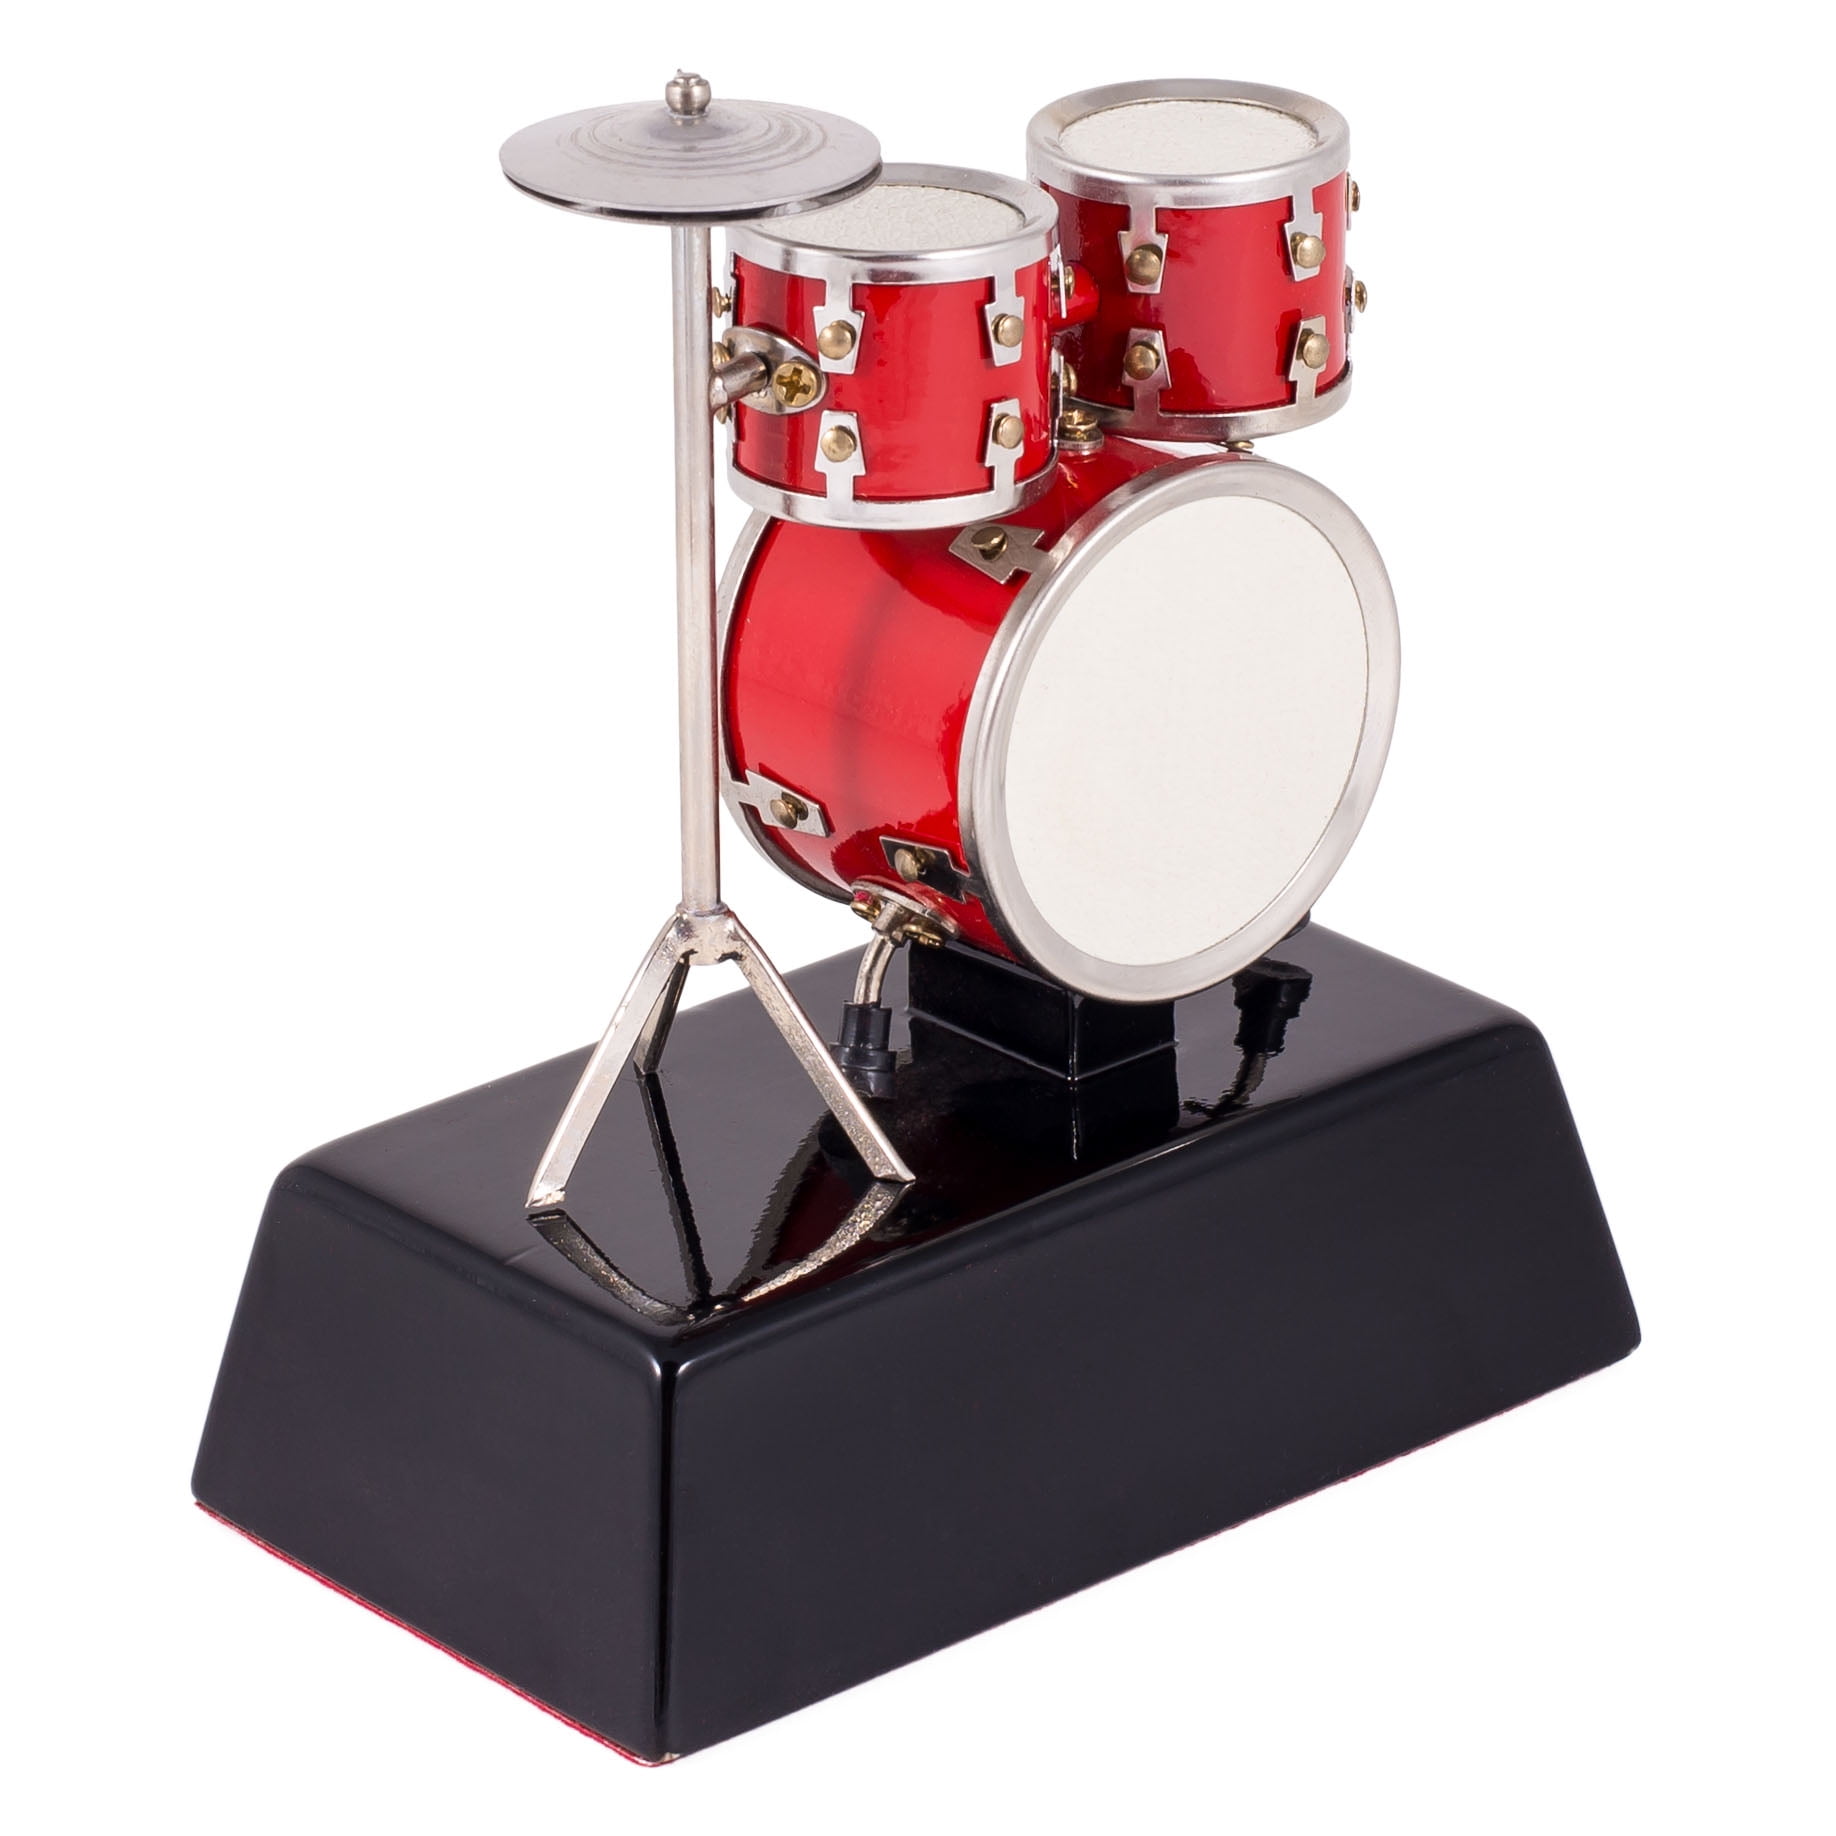 For Markfeldstein finger touch mini drum set percussion toy gifts for friends 